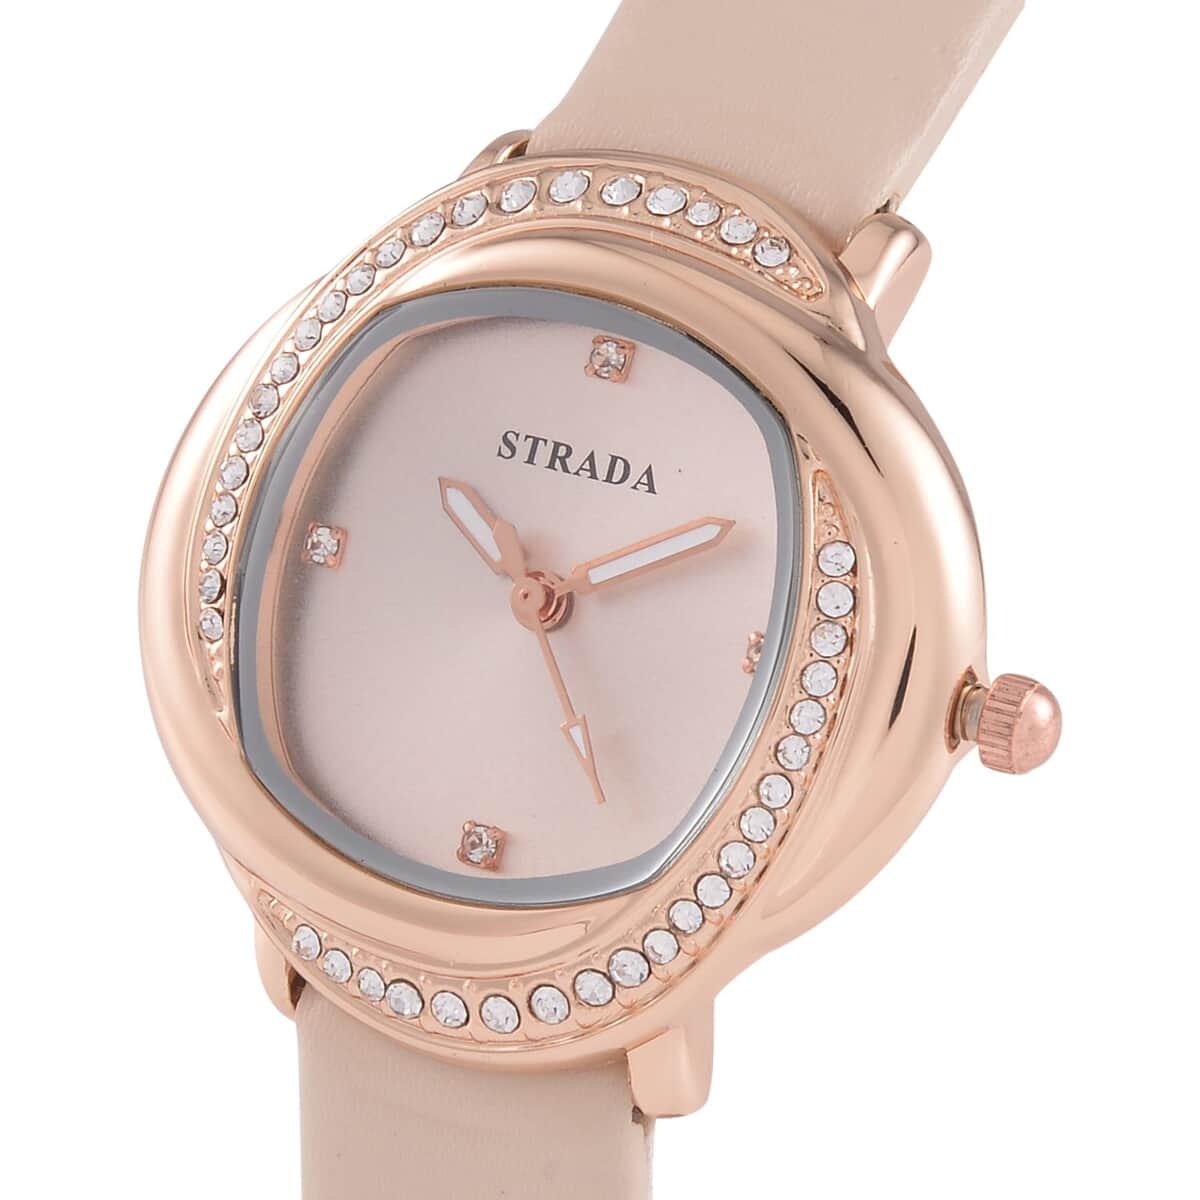 Strada Austrian Crystal Japanese Movement Watch with Light Apricot Faux Leather Strap (25.40mm) (6.0-7.5 Inches) image number 3